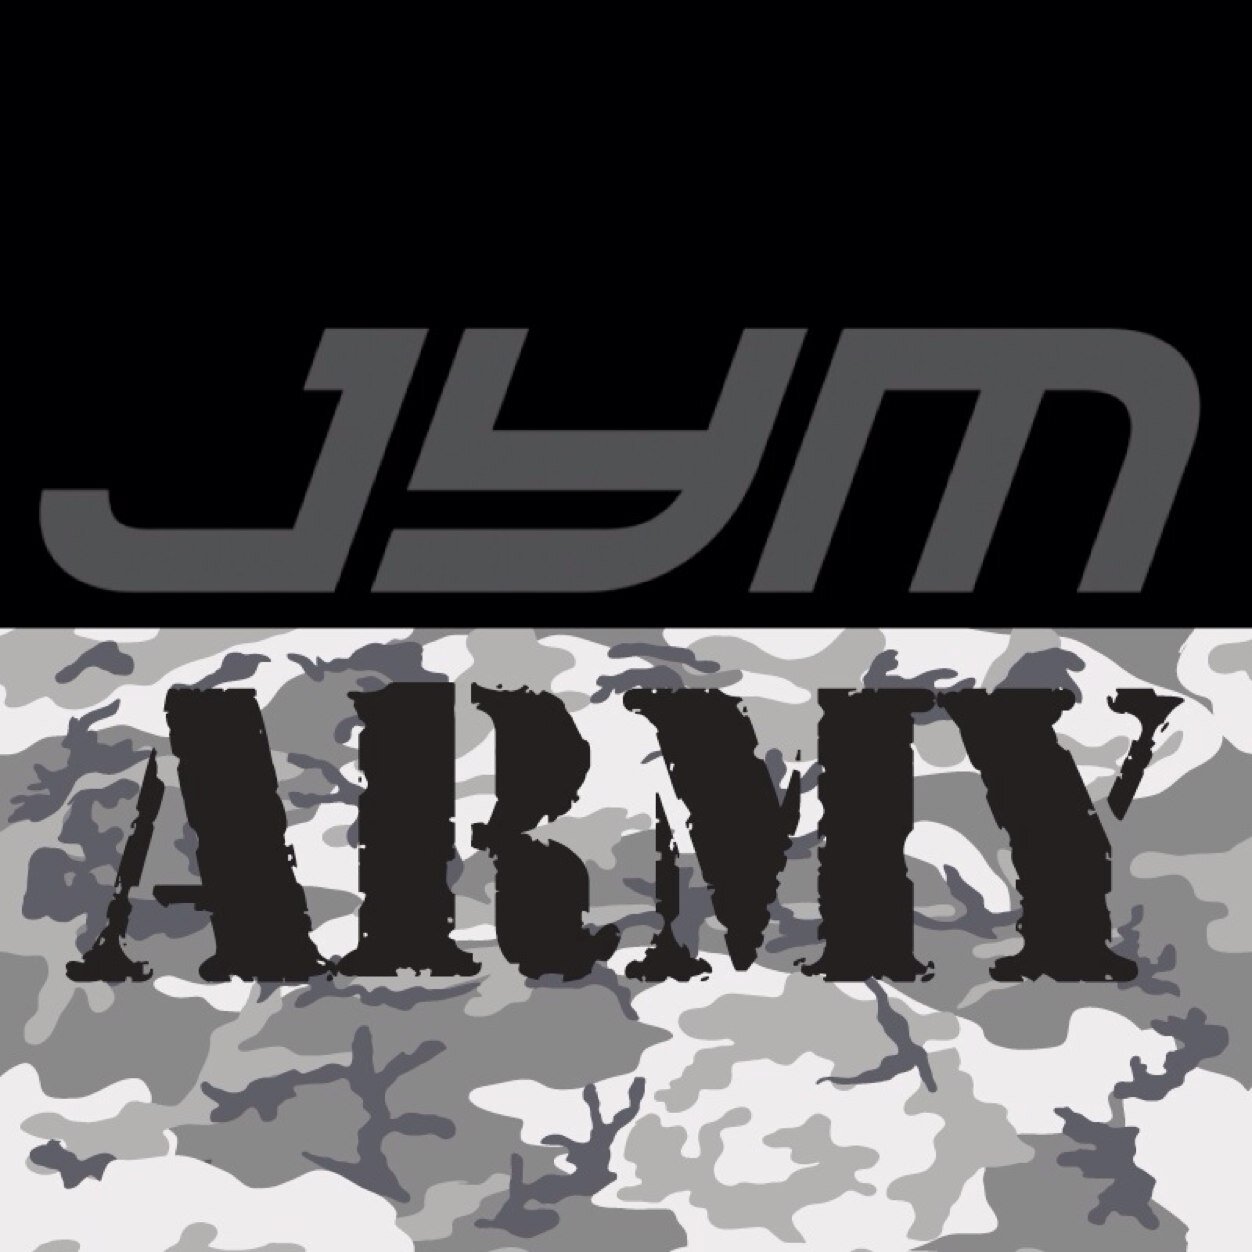 A place where the soldiers of the #JYMArmy can share their knowledge about training, nutrition, recipes... Fueled by https://t.co/SgmJZONYEO